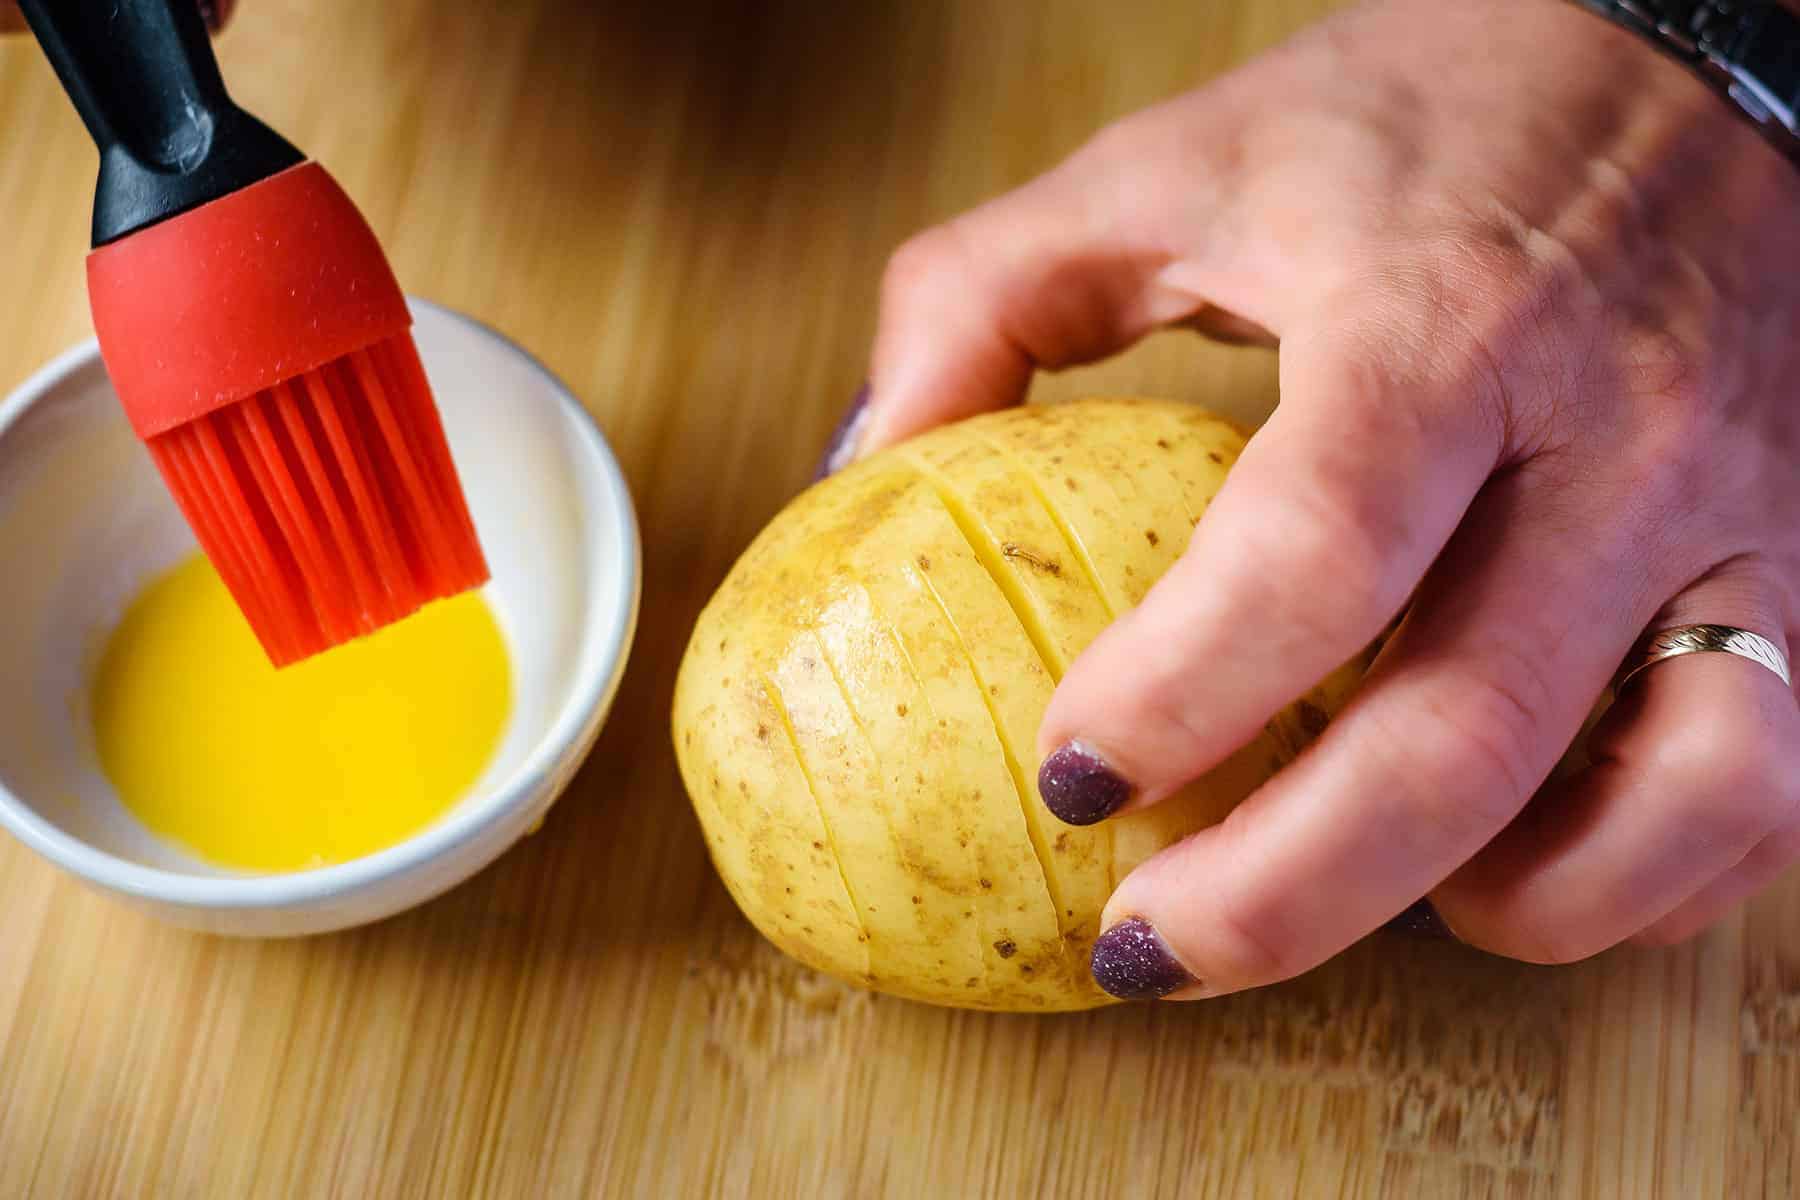 Using hand to separate slices to apply butter